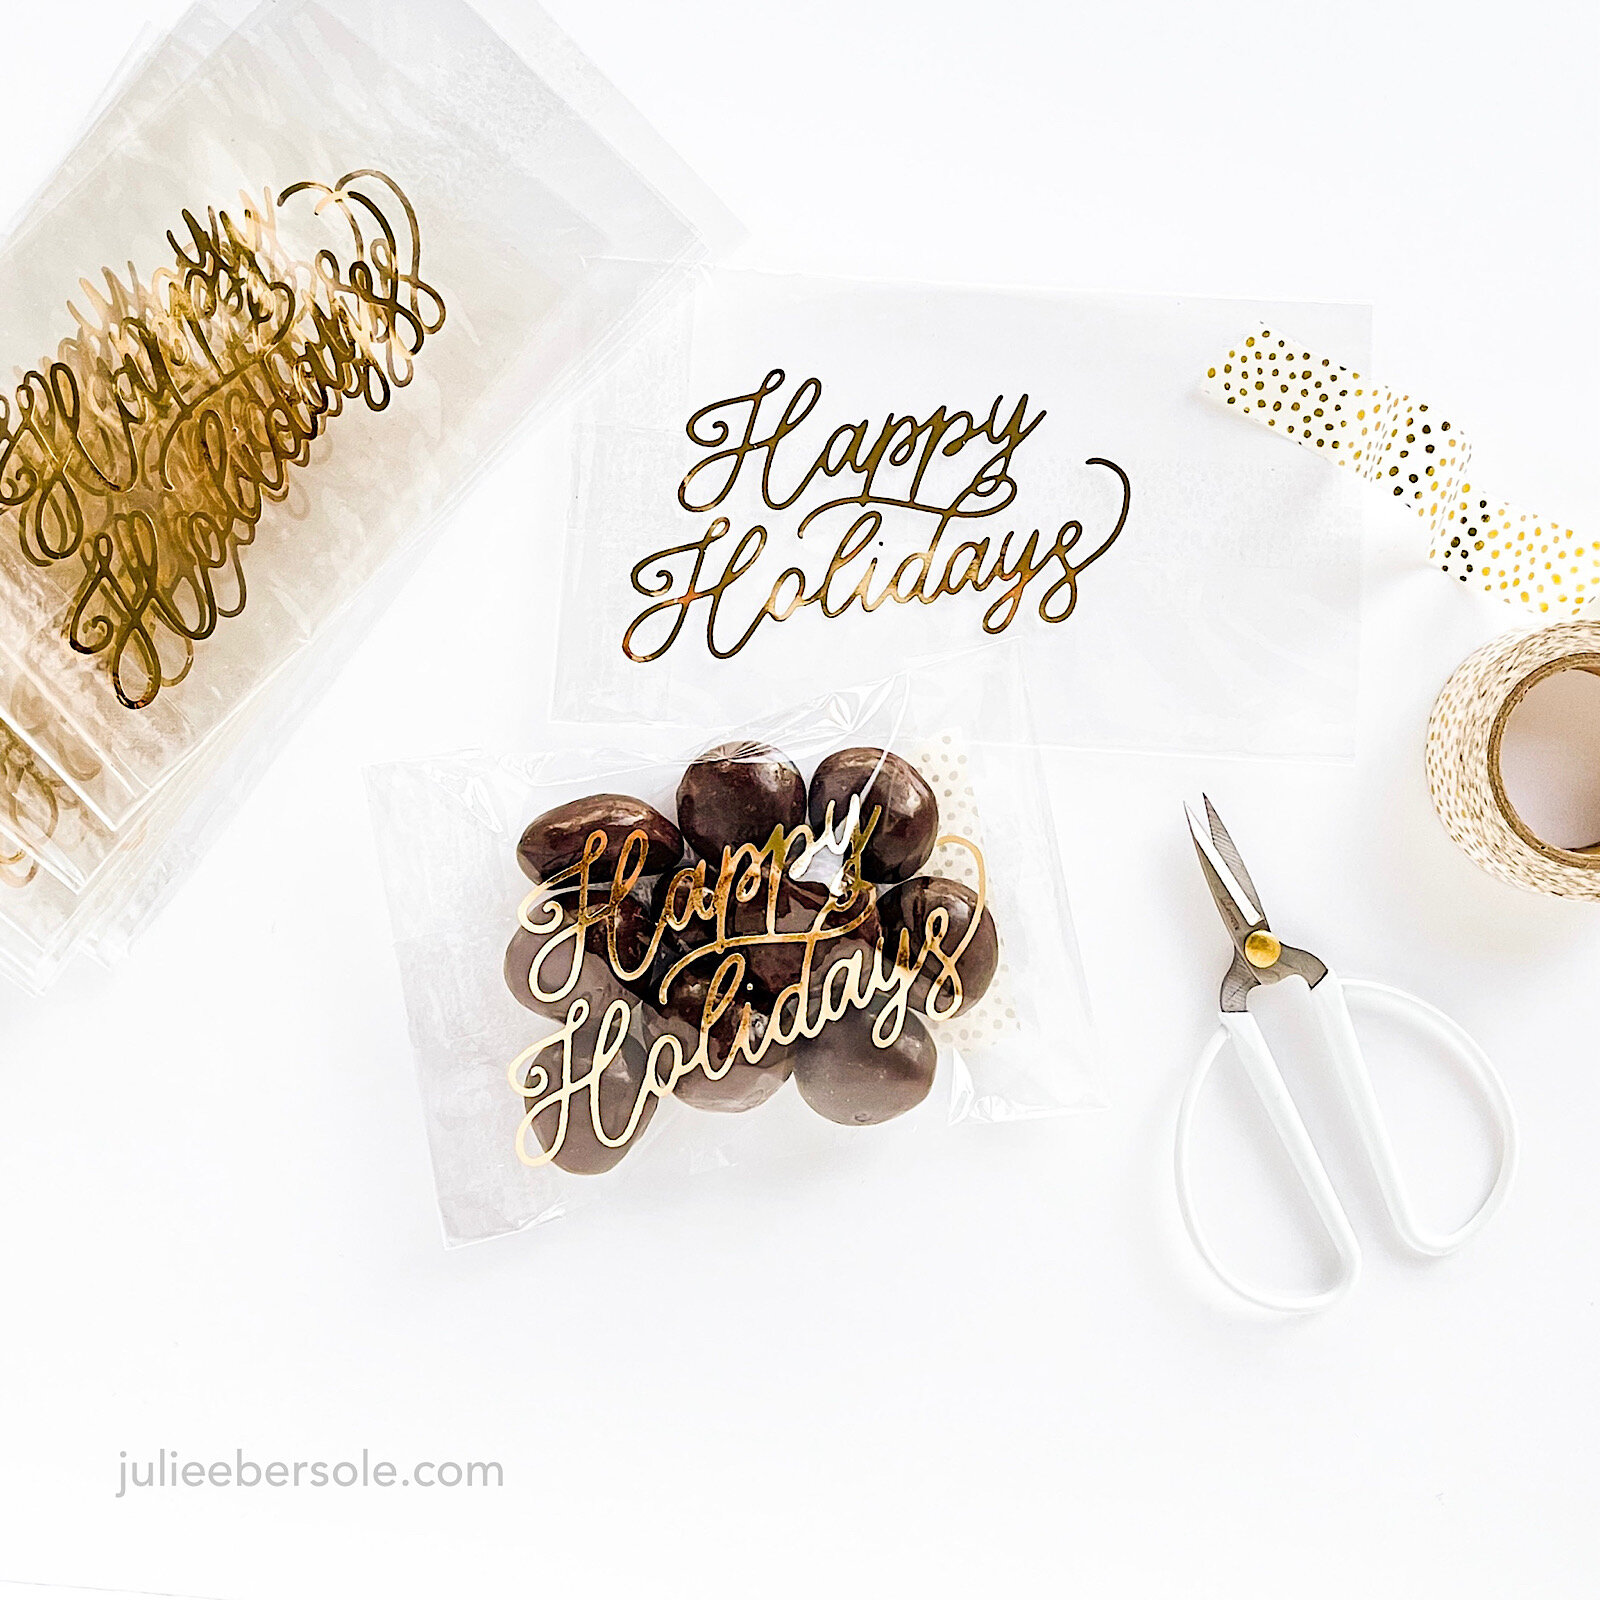 Create Beautiful Embossed Designs with Manual Hot Foil Stamping